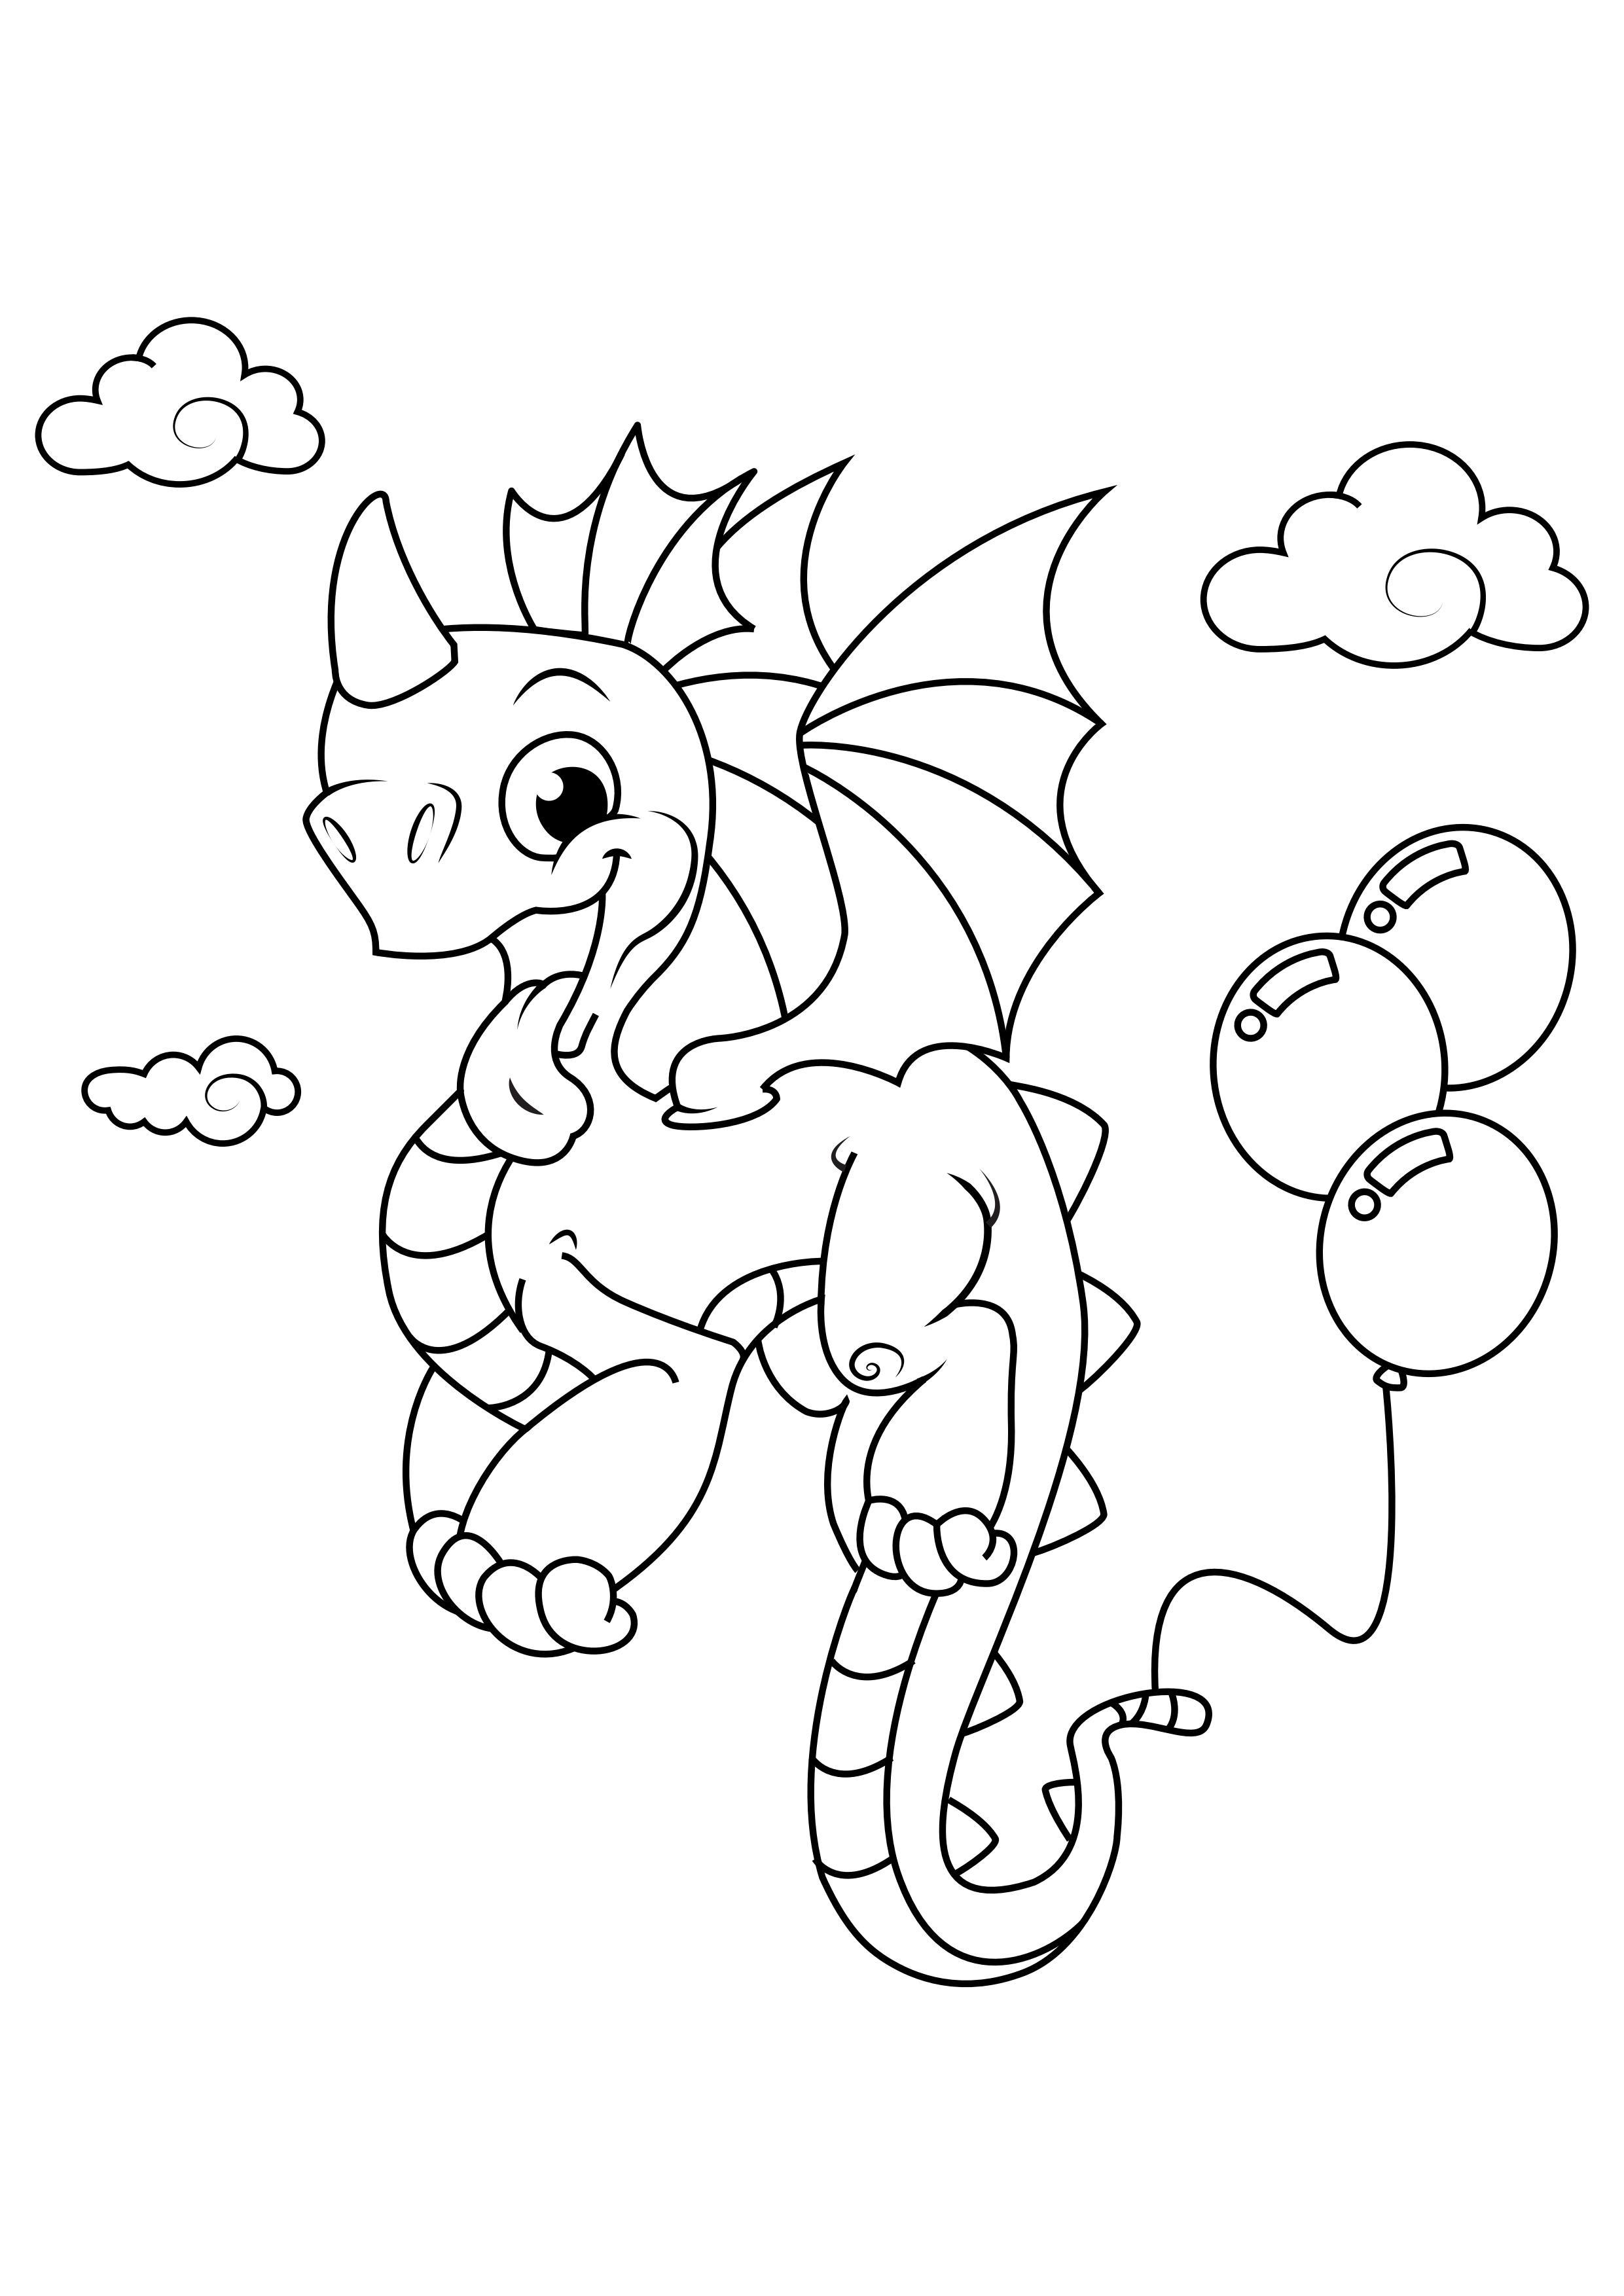 Coloring Page dragon with balloons   free printable coloring pages ...